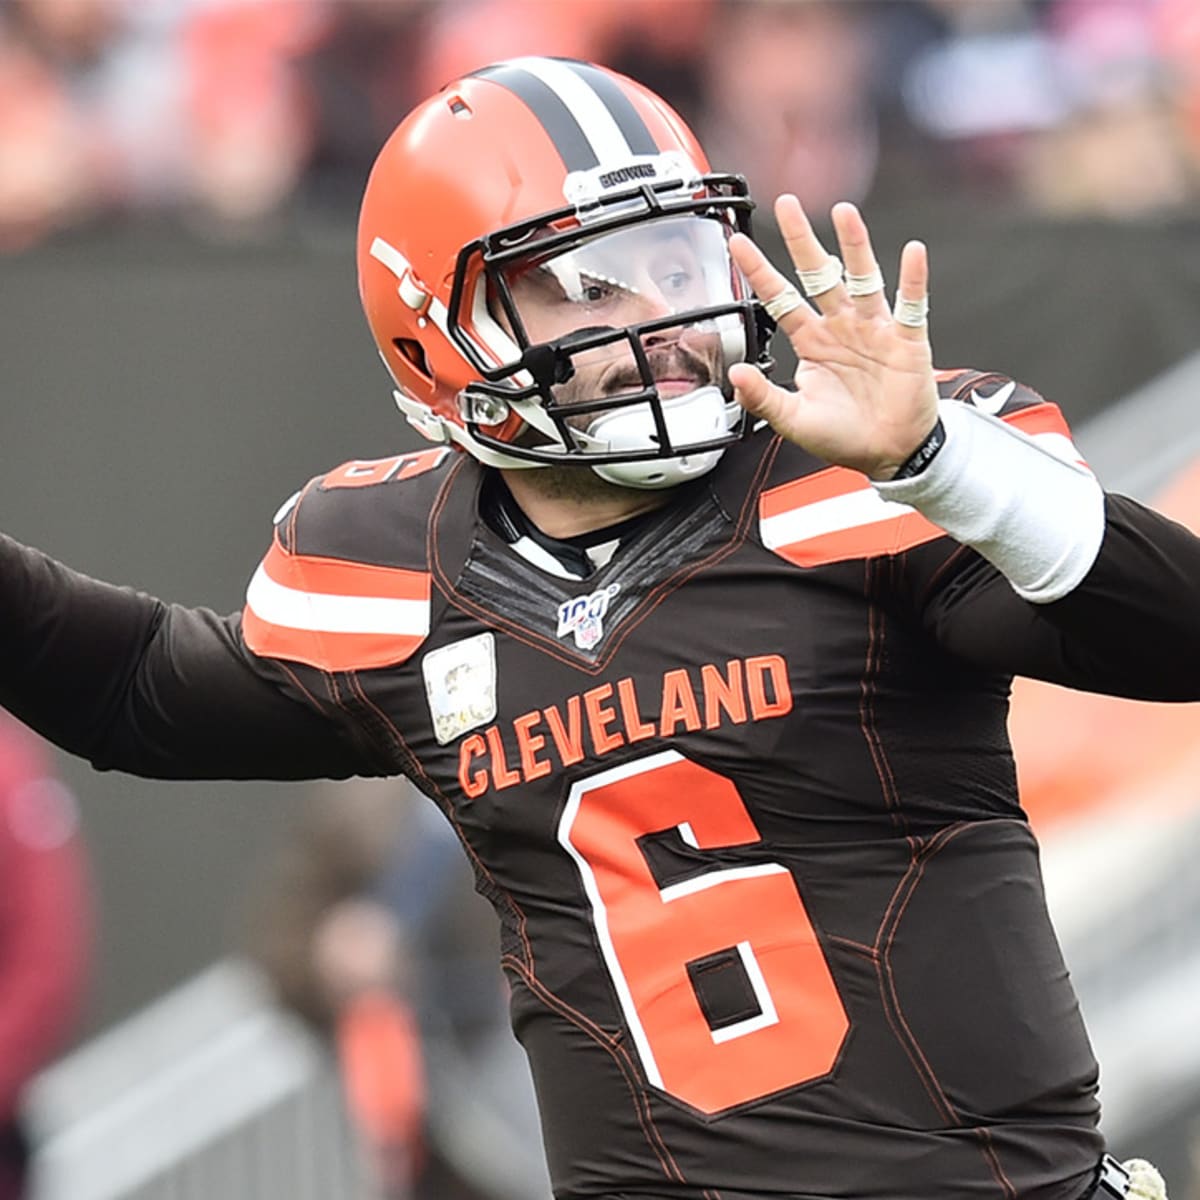 Browns vs. Steelers live stream: TV channel, how to watch